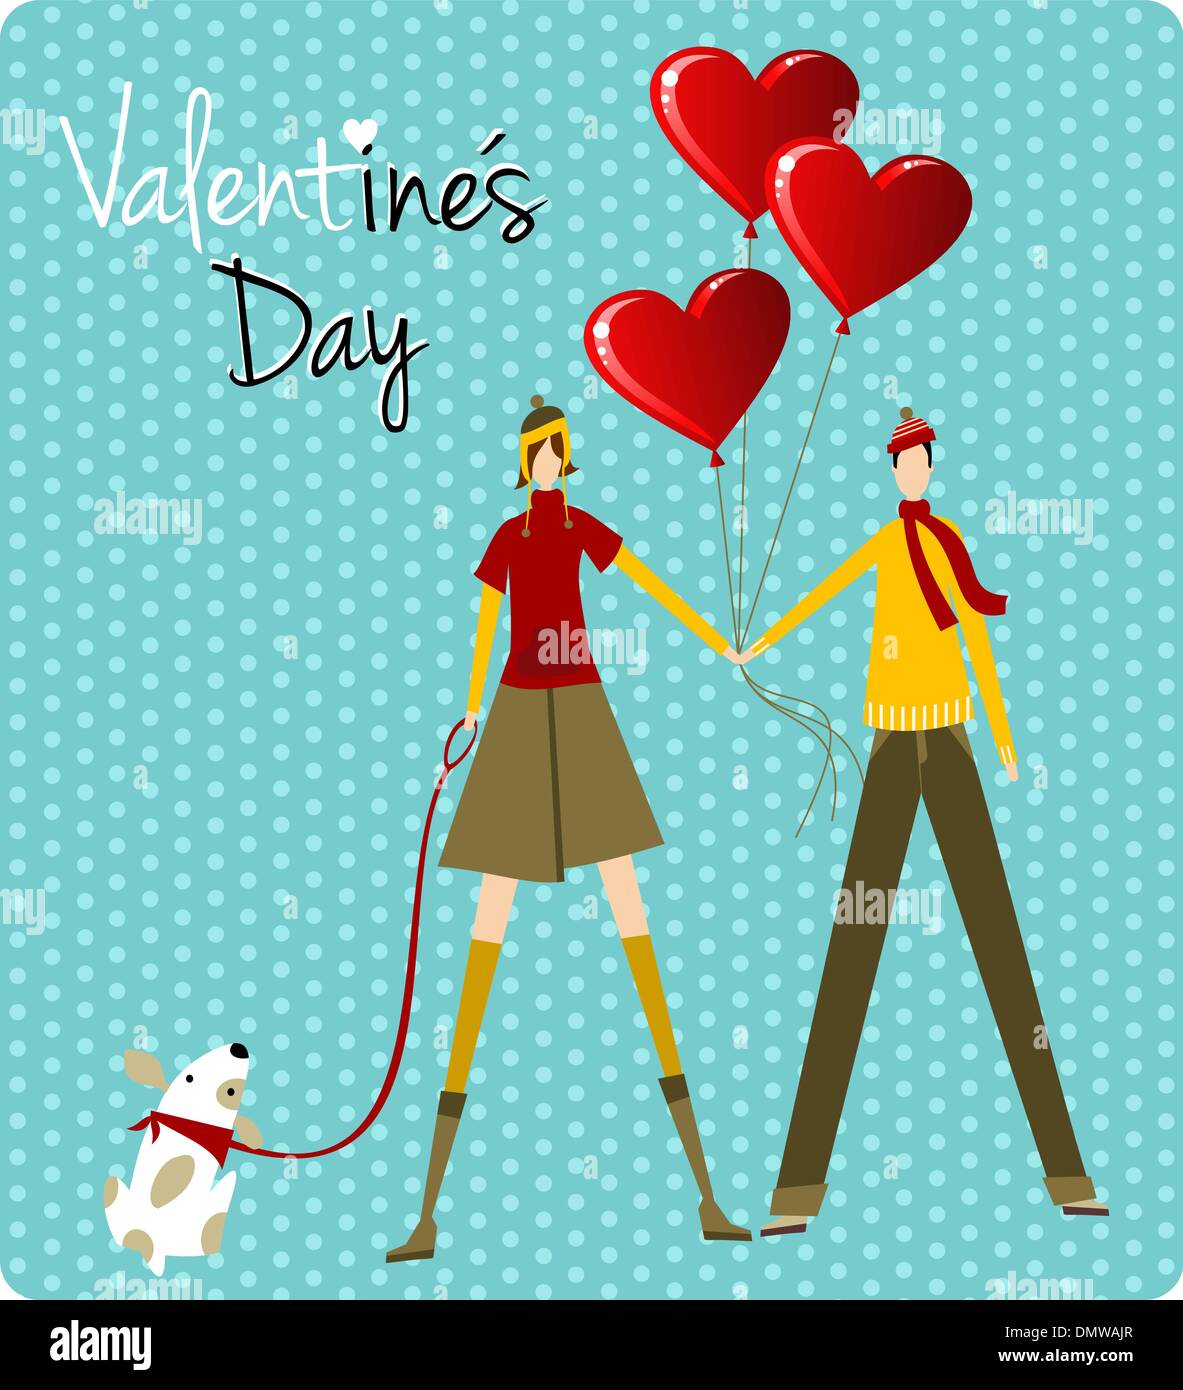 Couple and dog love Valentines day greeting card Stock Vector ...